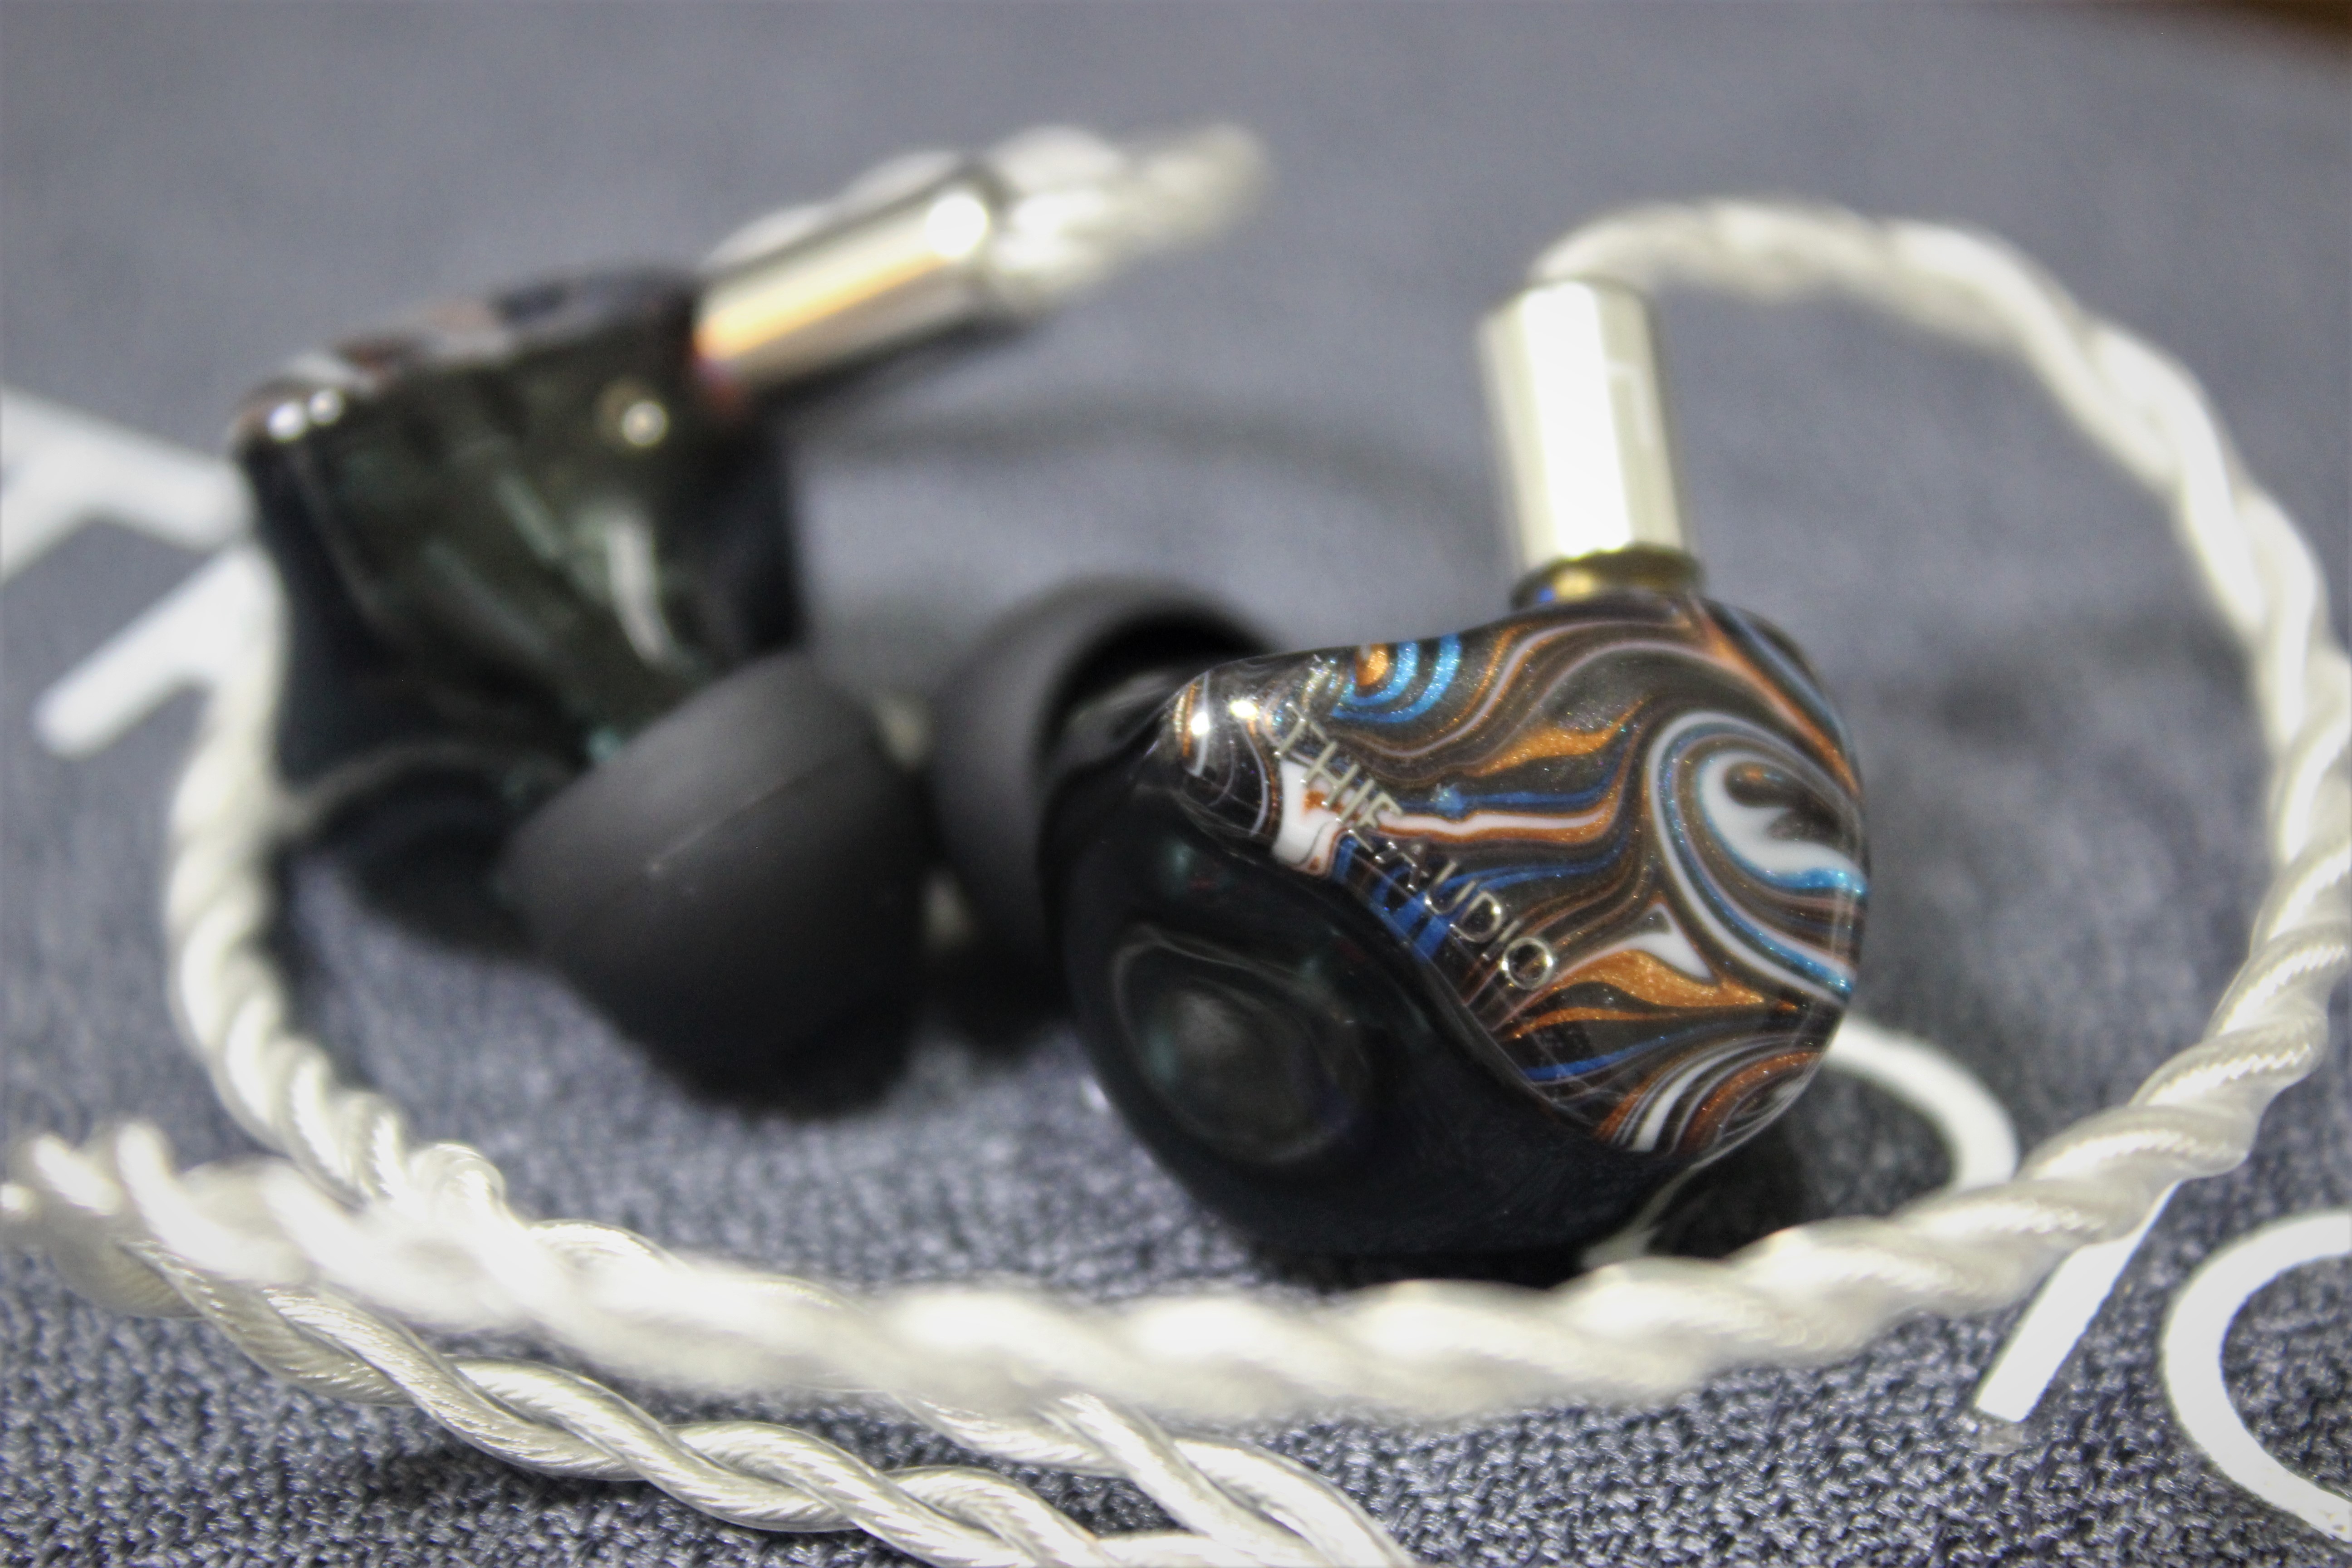 ThieAudio Legacy 4: Unboxing – In-Ear Fidelity